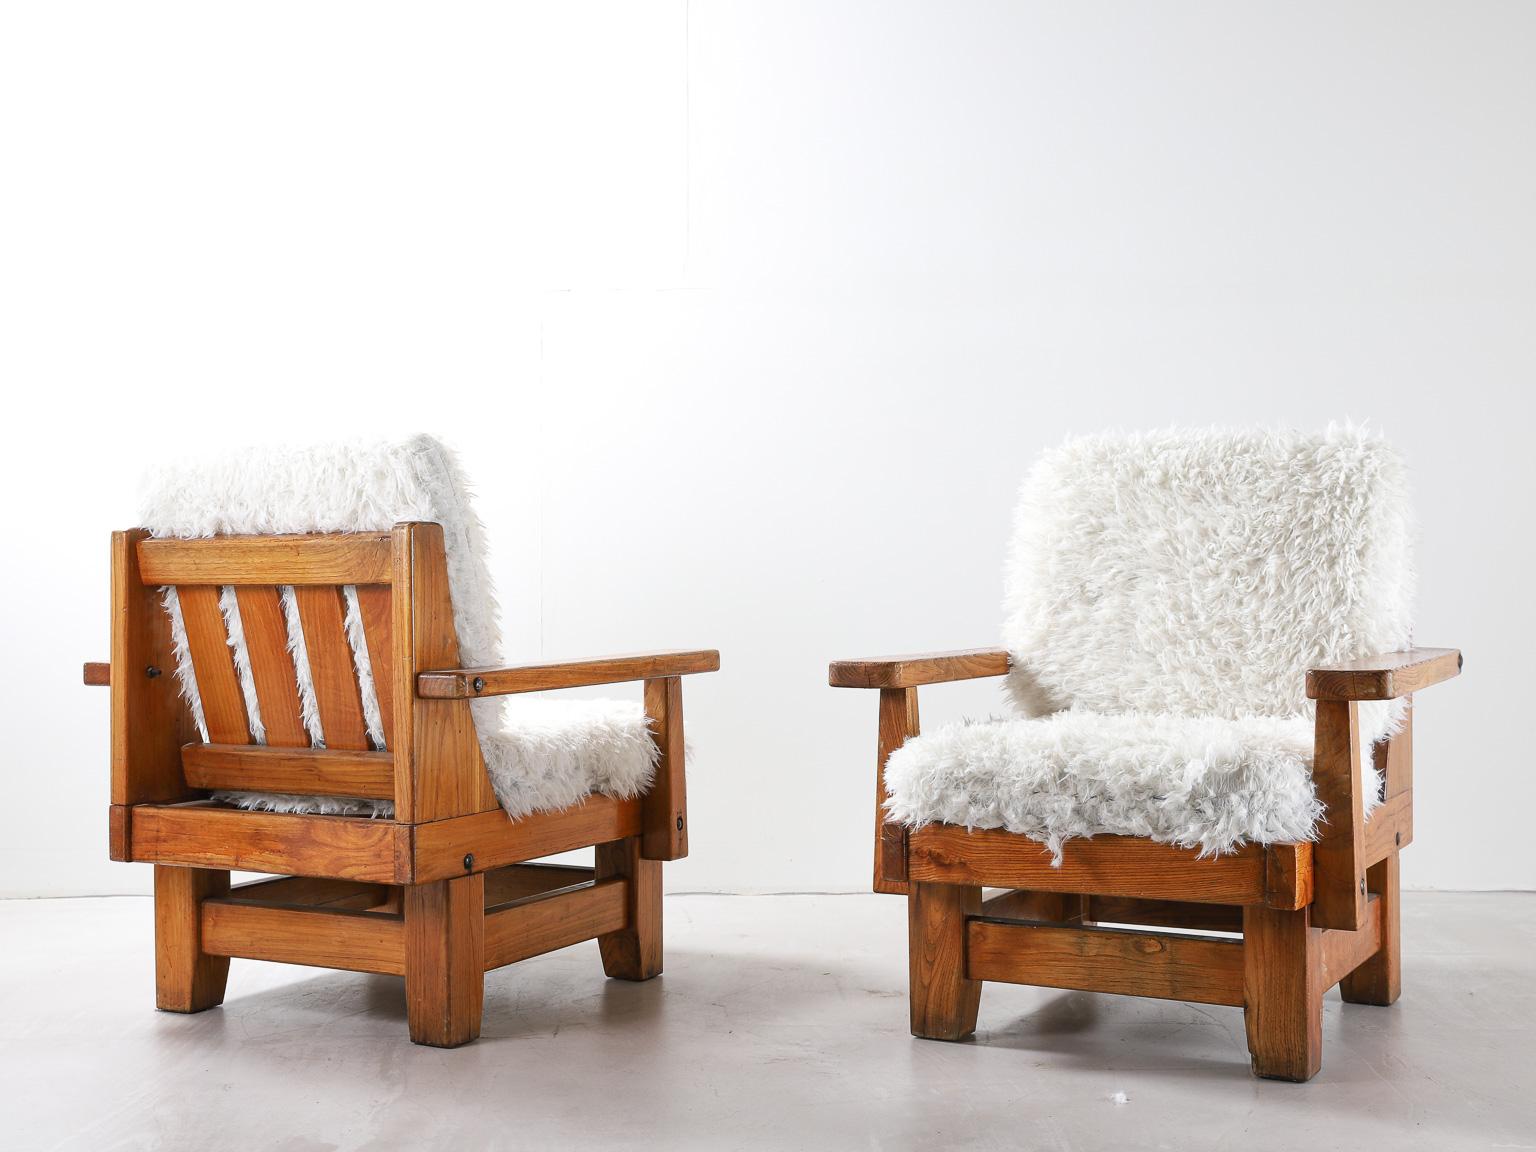 Pair of Northern Spanish armchairs with sheepskin upholstered cushions.

